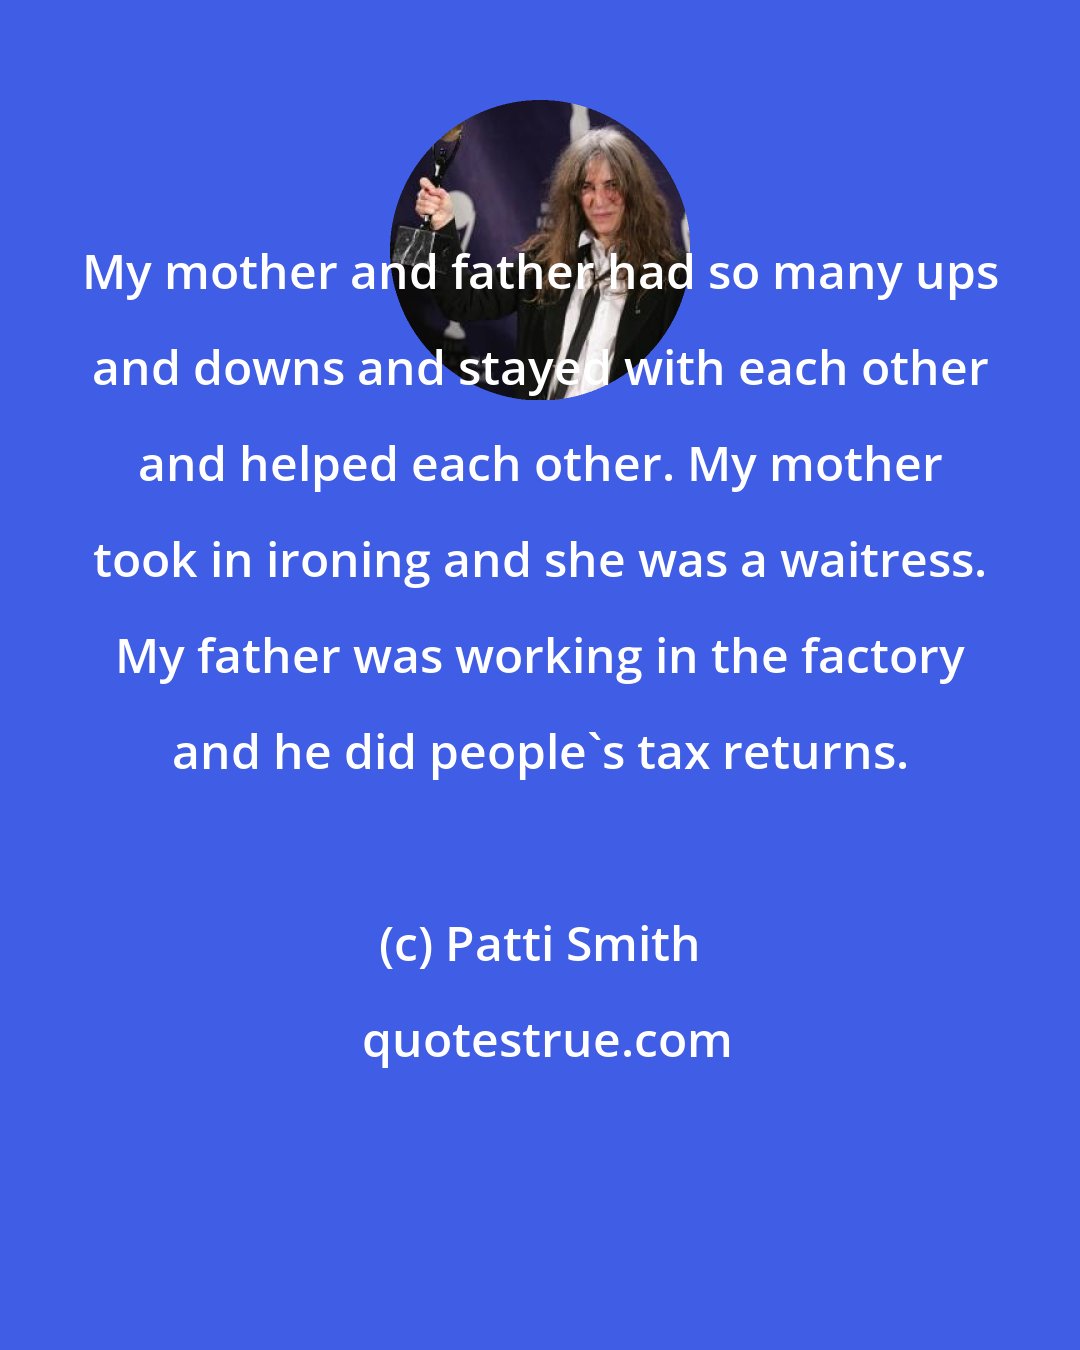 Patti Smith: My mother and father had so many ups and downs and stayed with each other and helped each other. My mother took in ironing and she was a waitress. My father was working in the factory and he did people's tax returns.